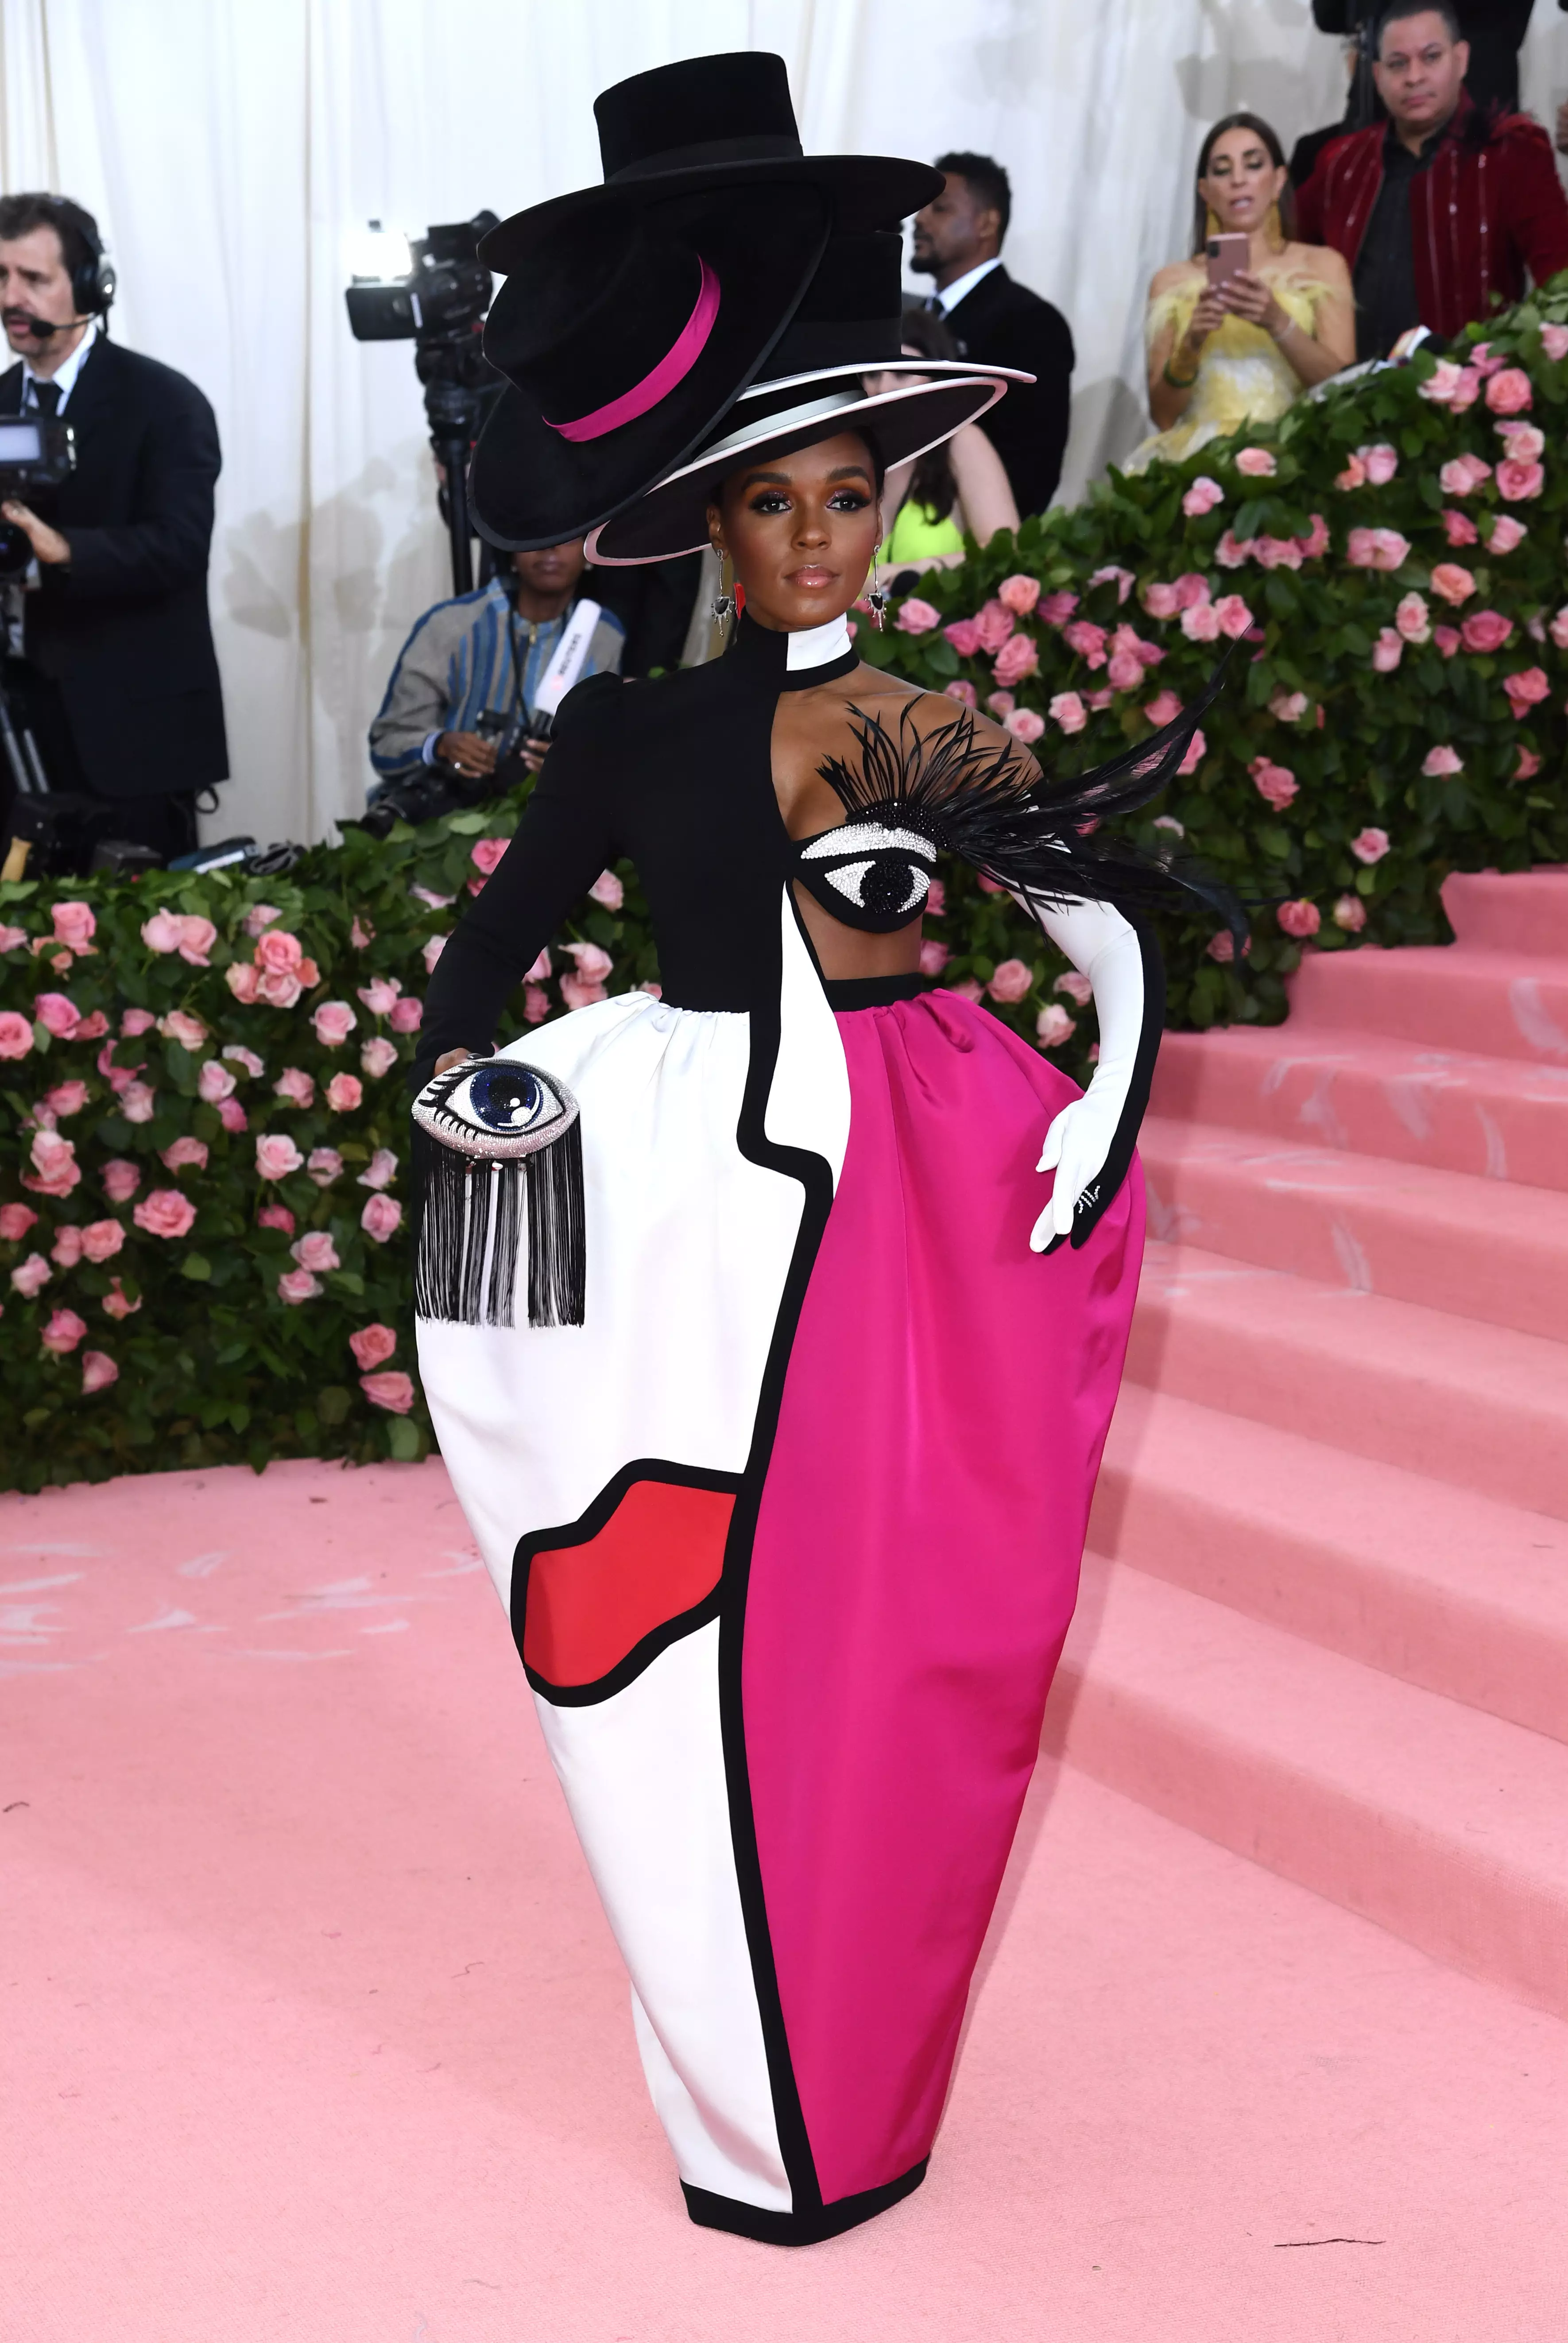 Janelle Monáe is rumoured to be working on music for the new film [